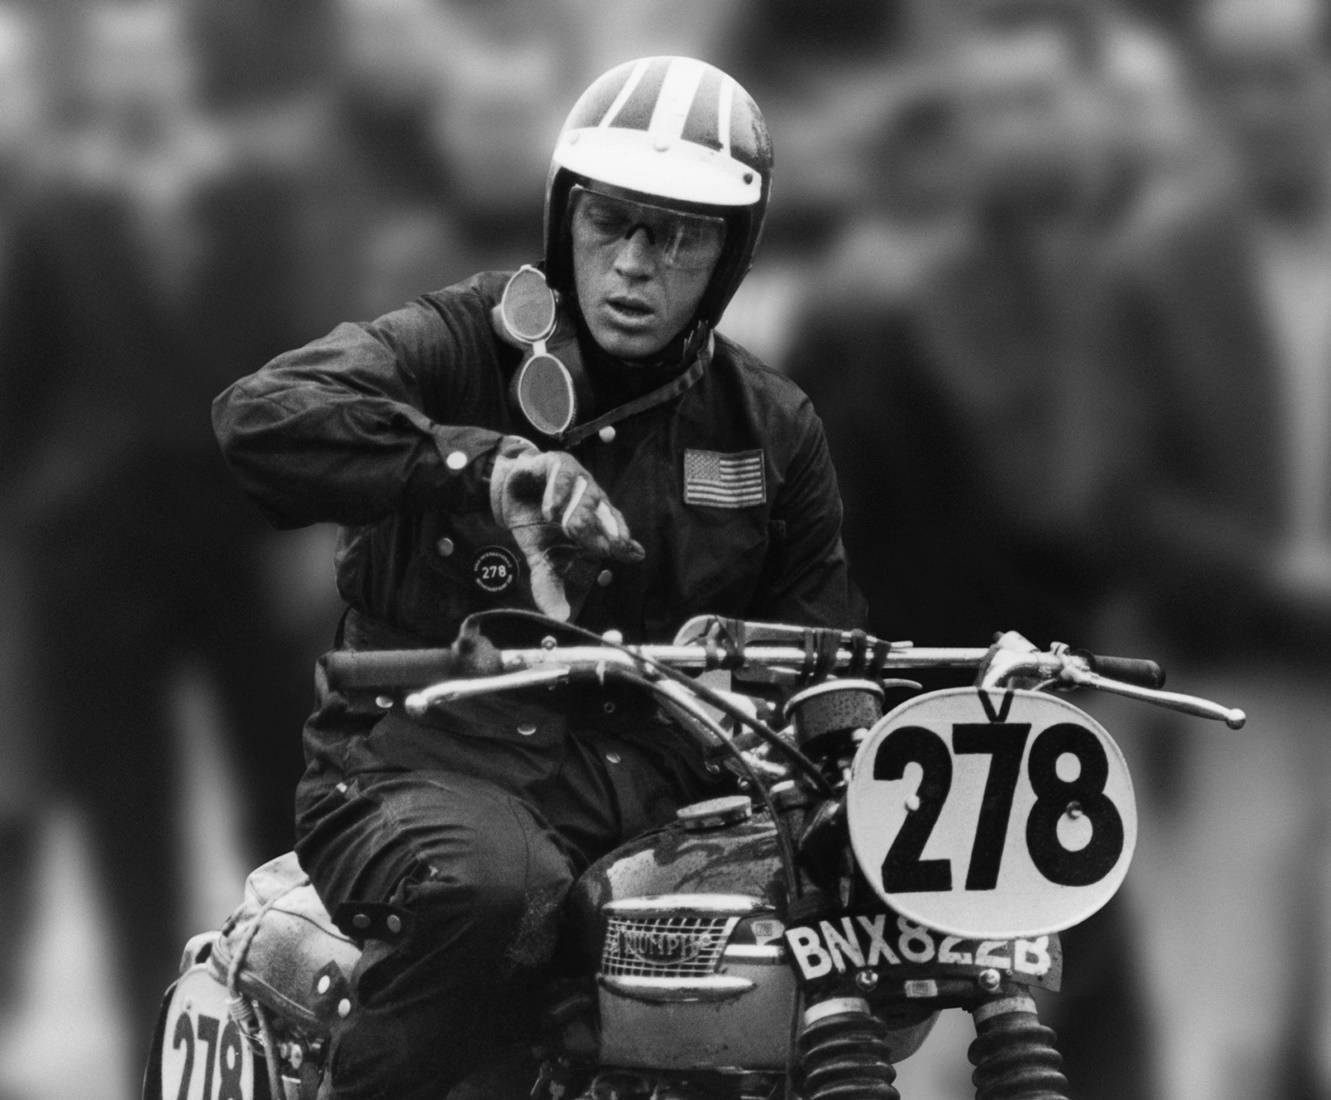 Steve McQueen Riding Motorcycle at 1964 International Six Day Trials. Wallpaper